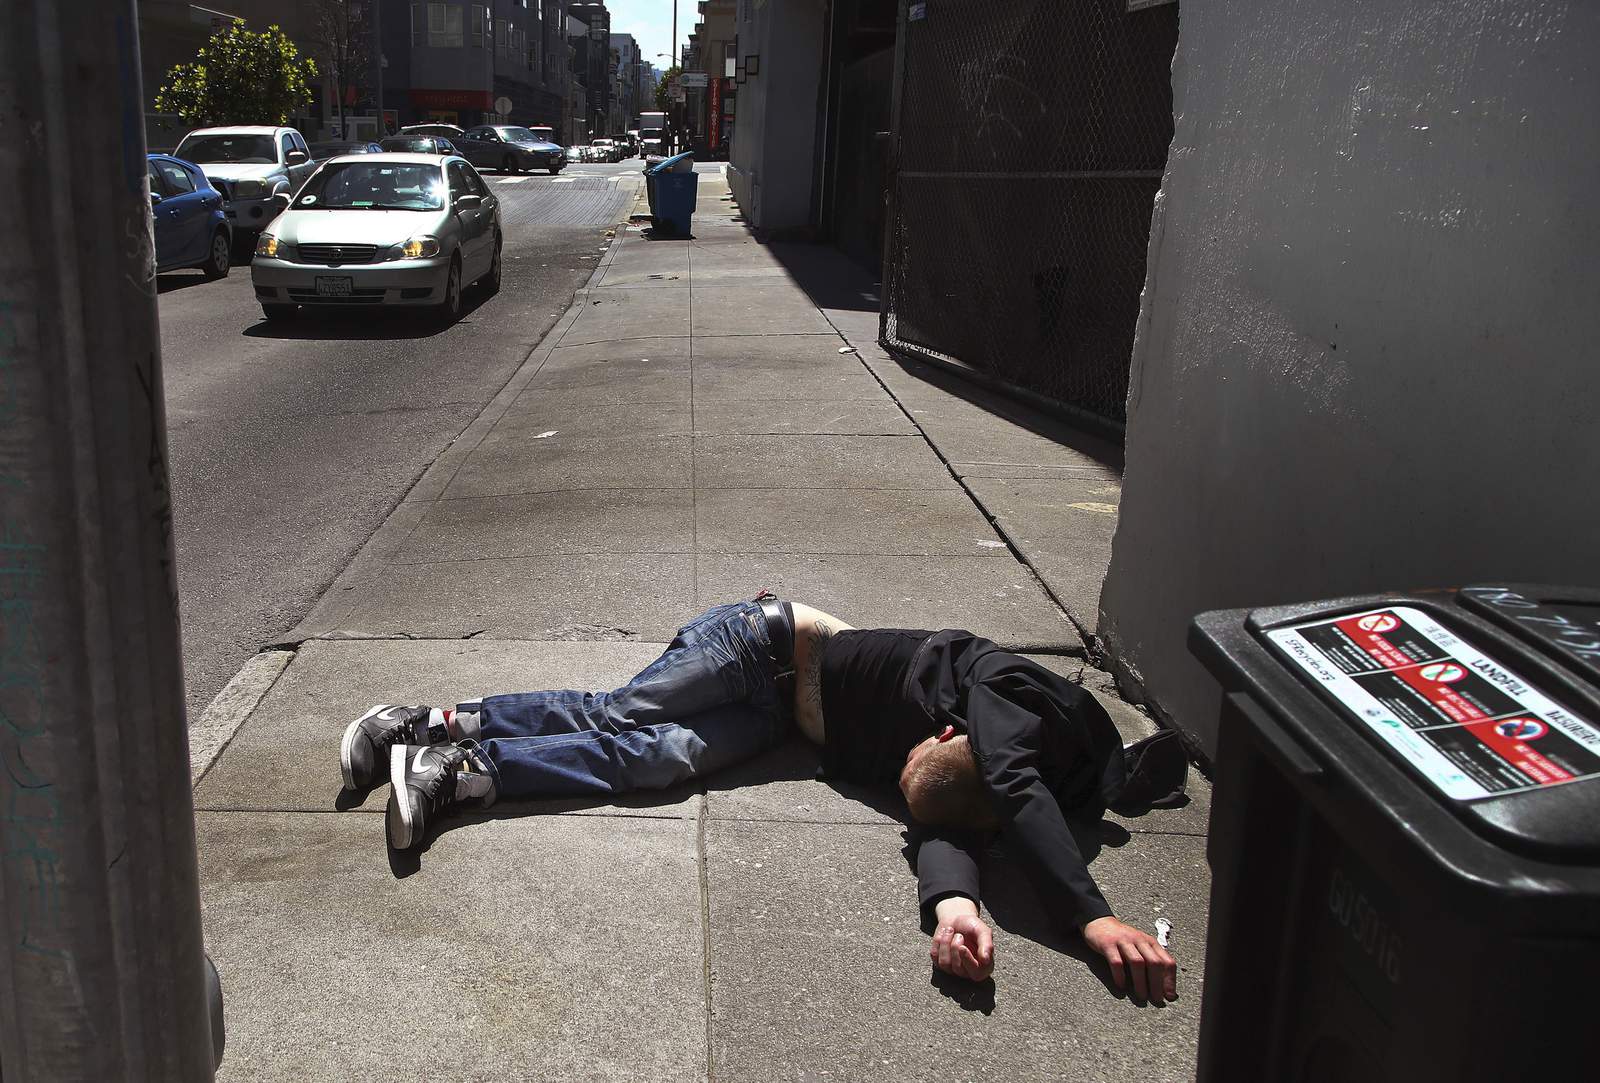 Overdose deaths far outpace COVID-19 deaths in San Francisco